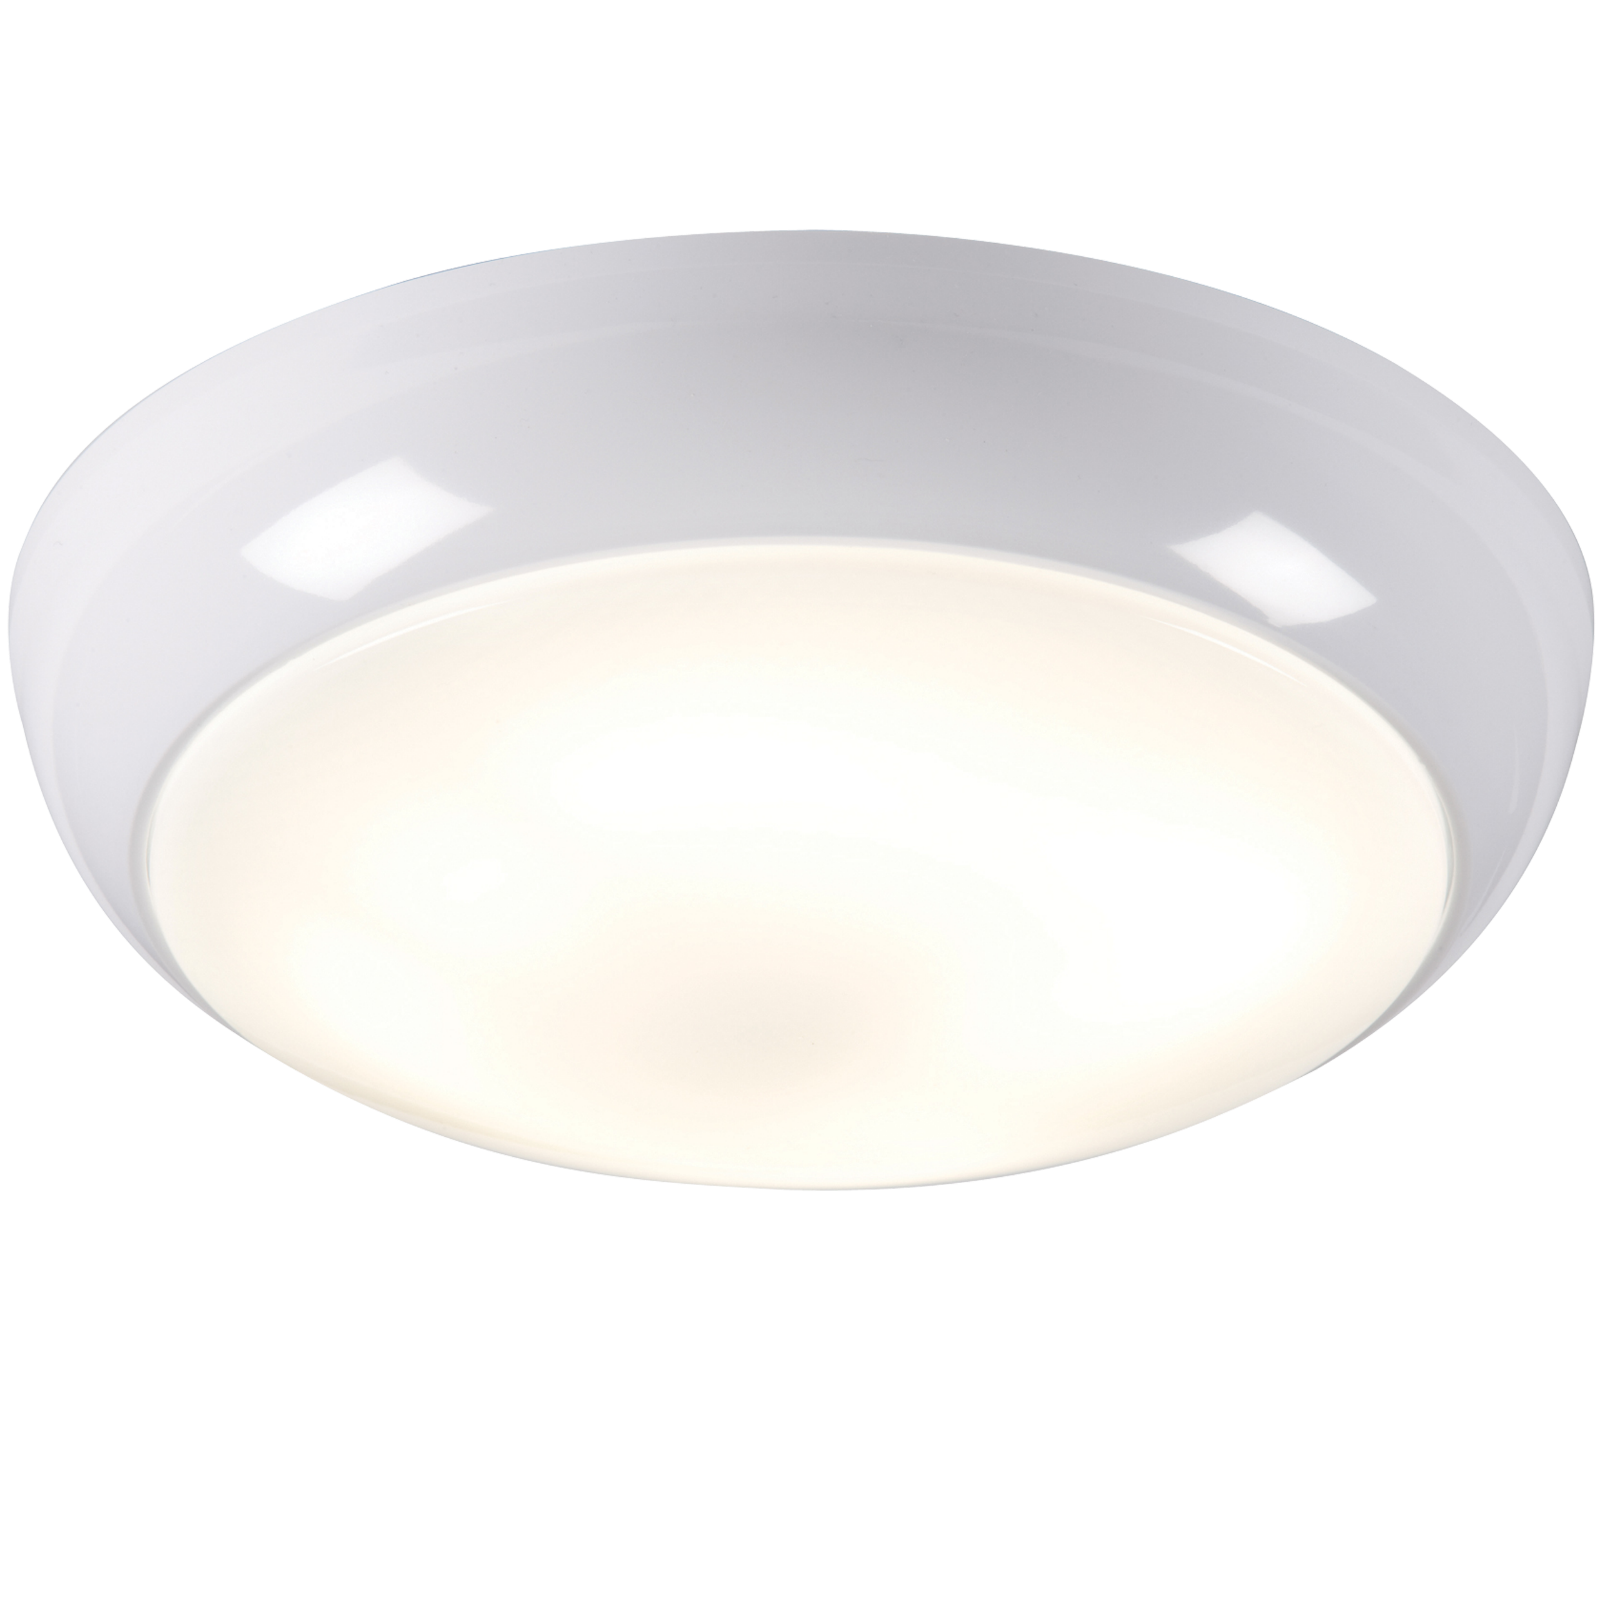 ML Accessories-TPB28WOEMHF IP44 28W HF EmergencyPolo Bulkhead with Opal Diffuser and White Base